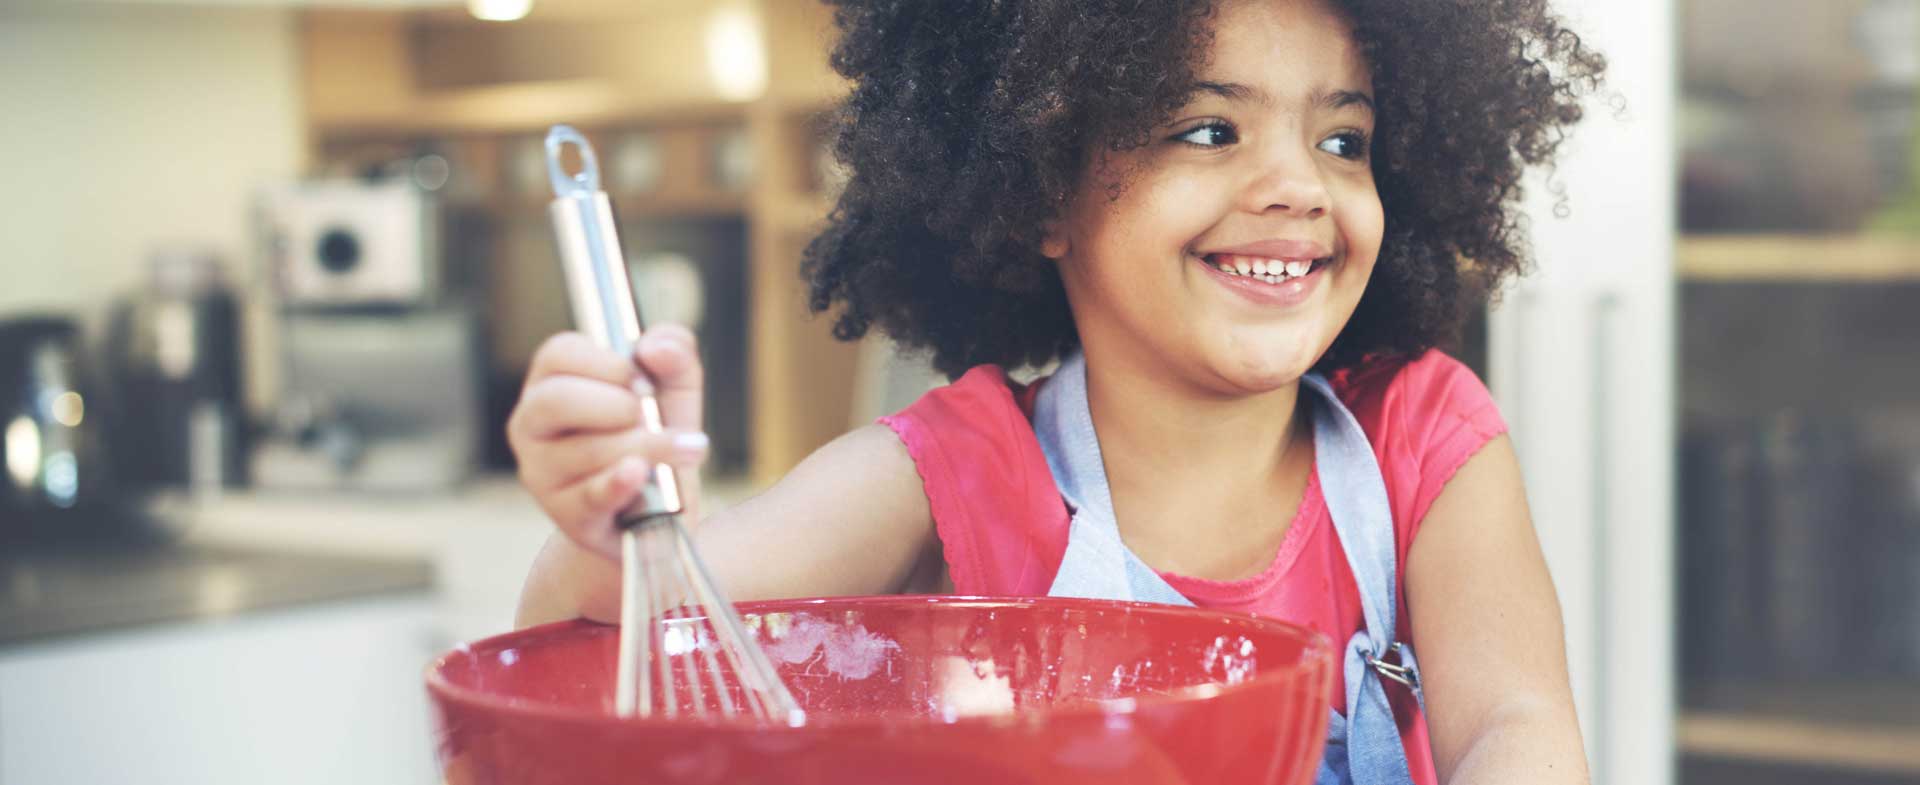 cooking with kids 1140x570